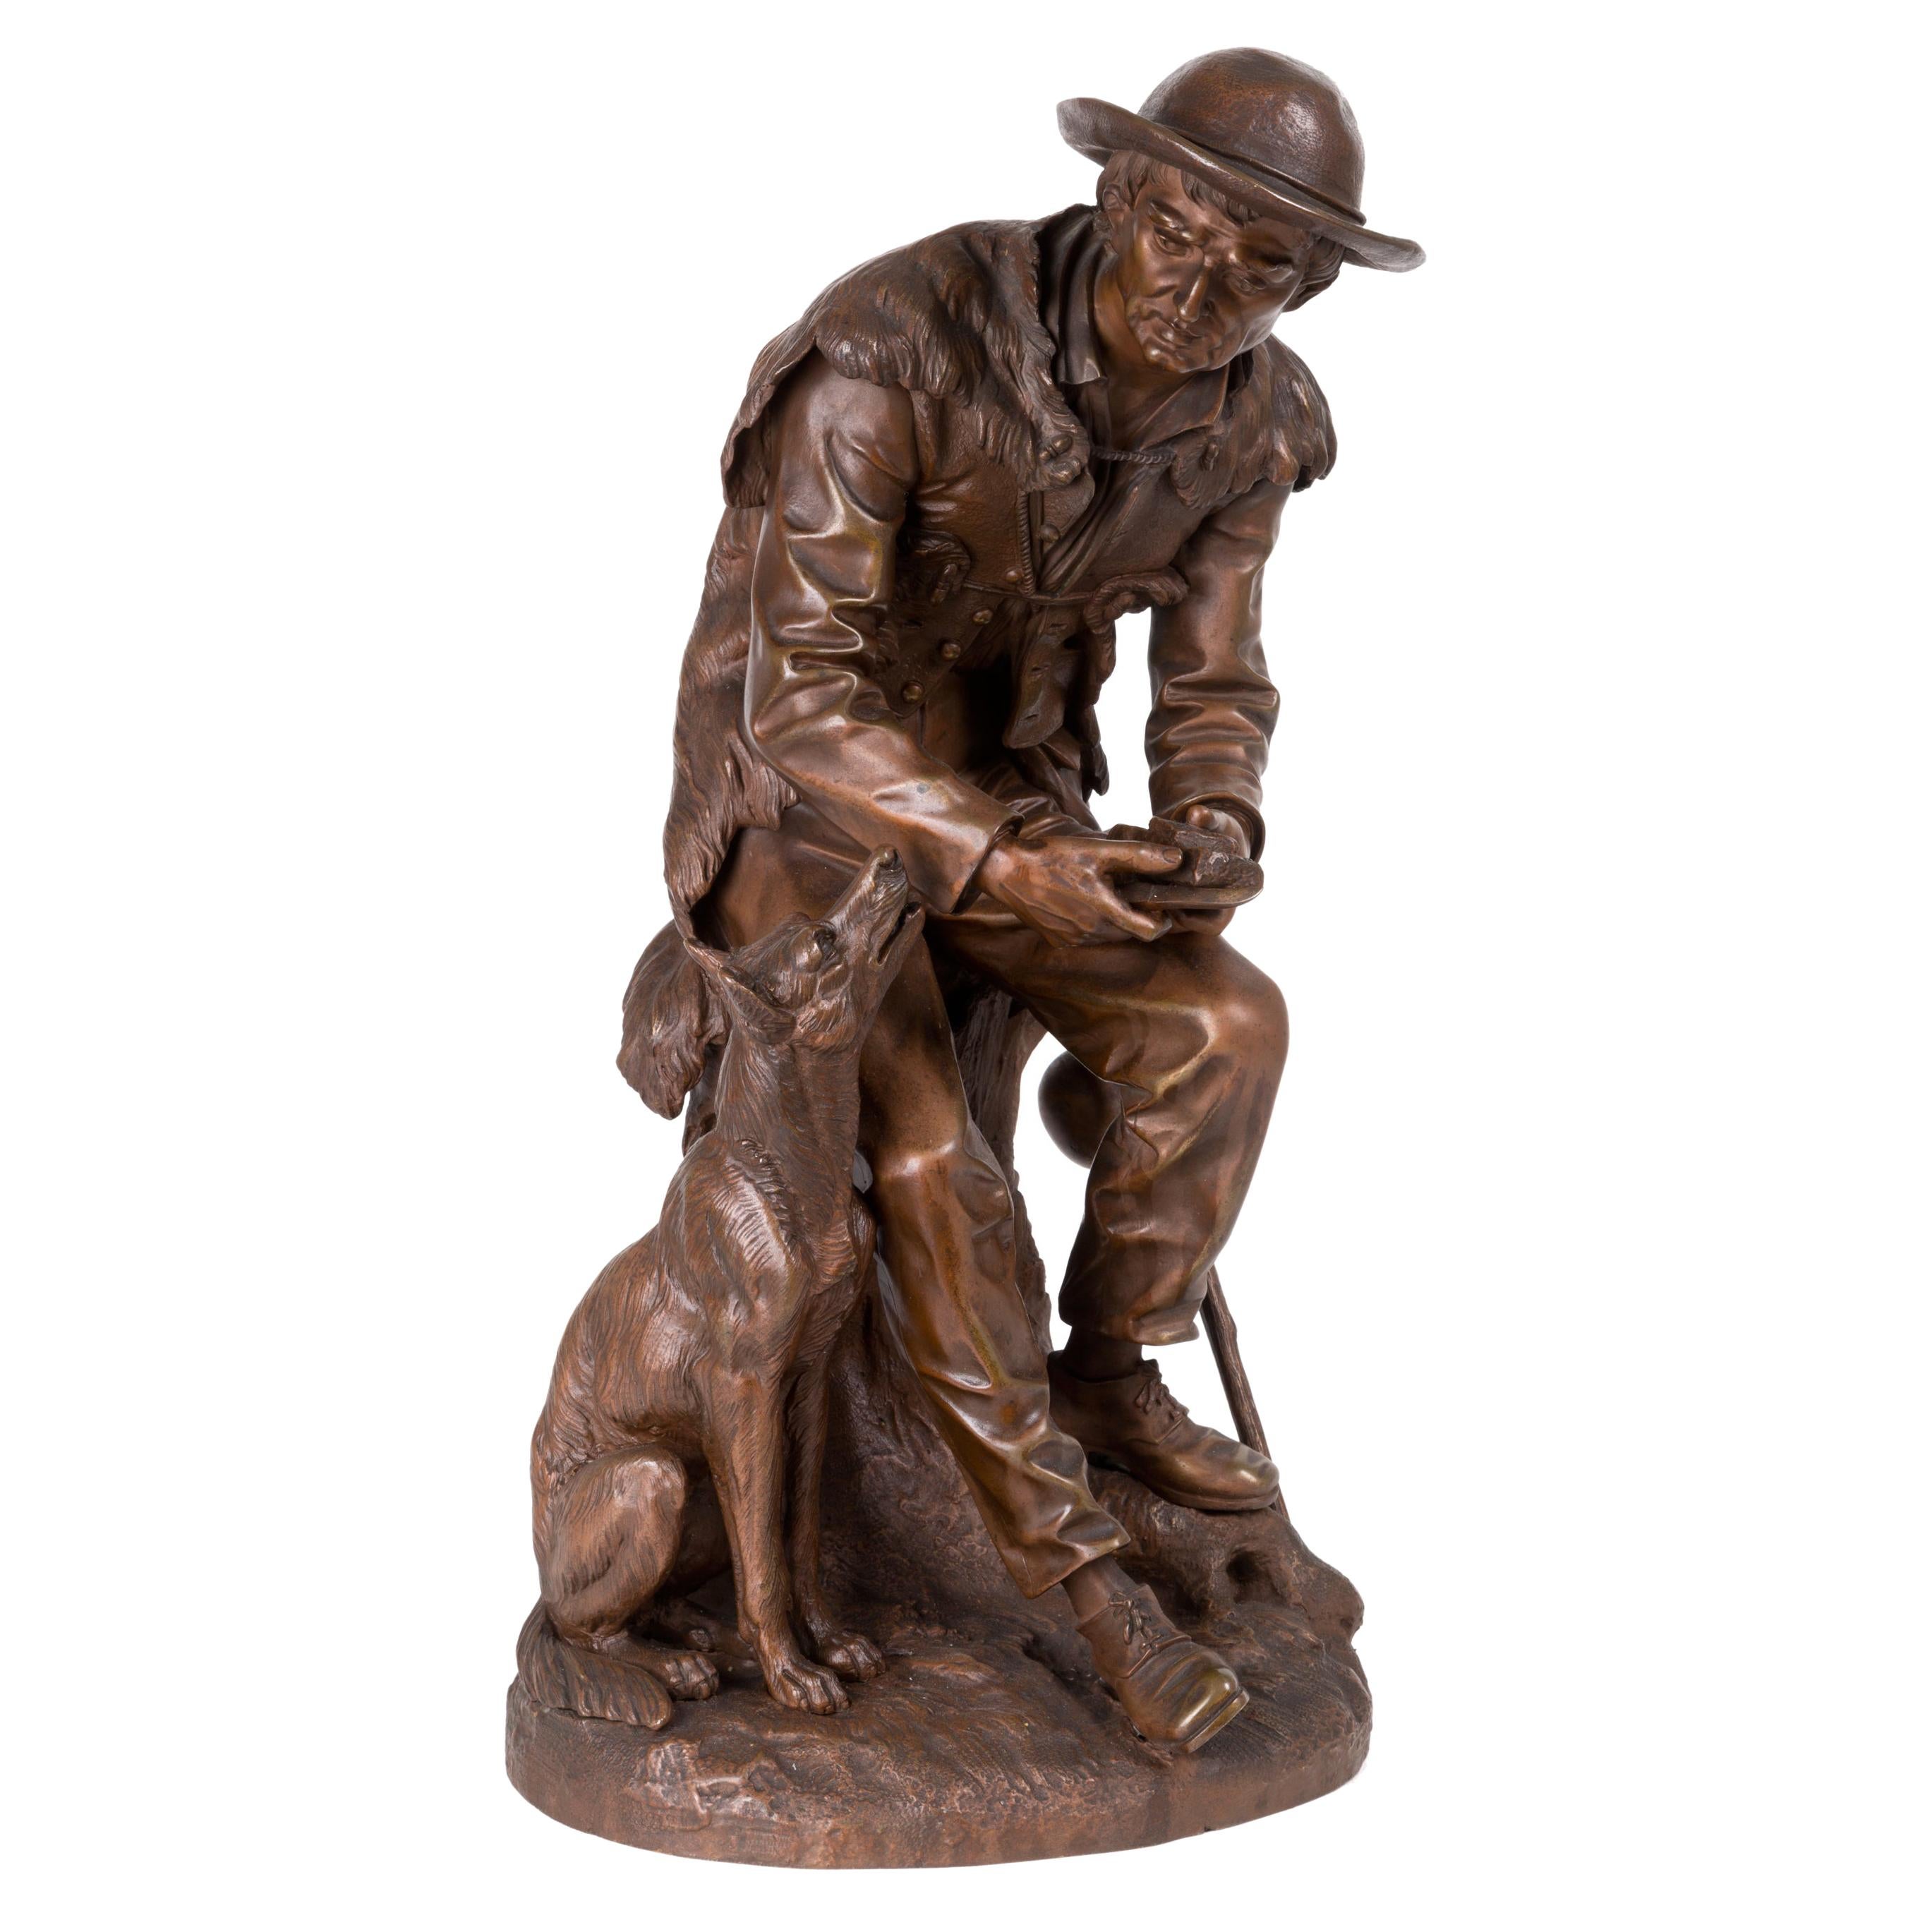 Anatole J. Guillot Bronze Sculpture Depicting "Seated woodcarver with dog" For Sale